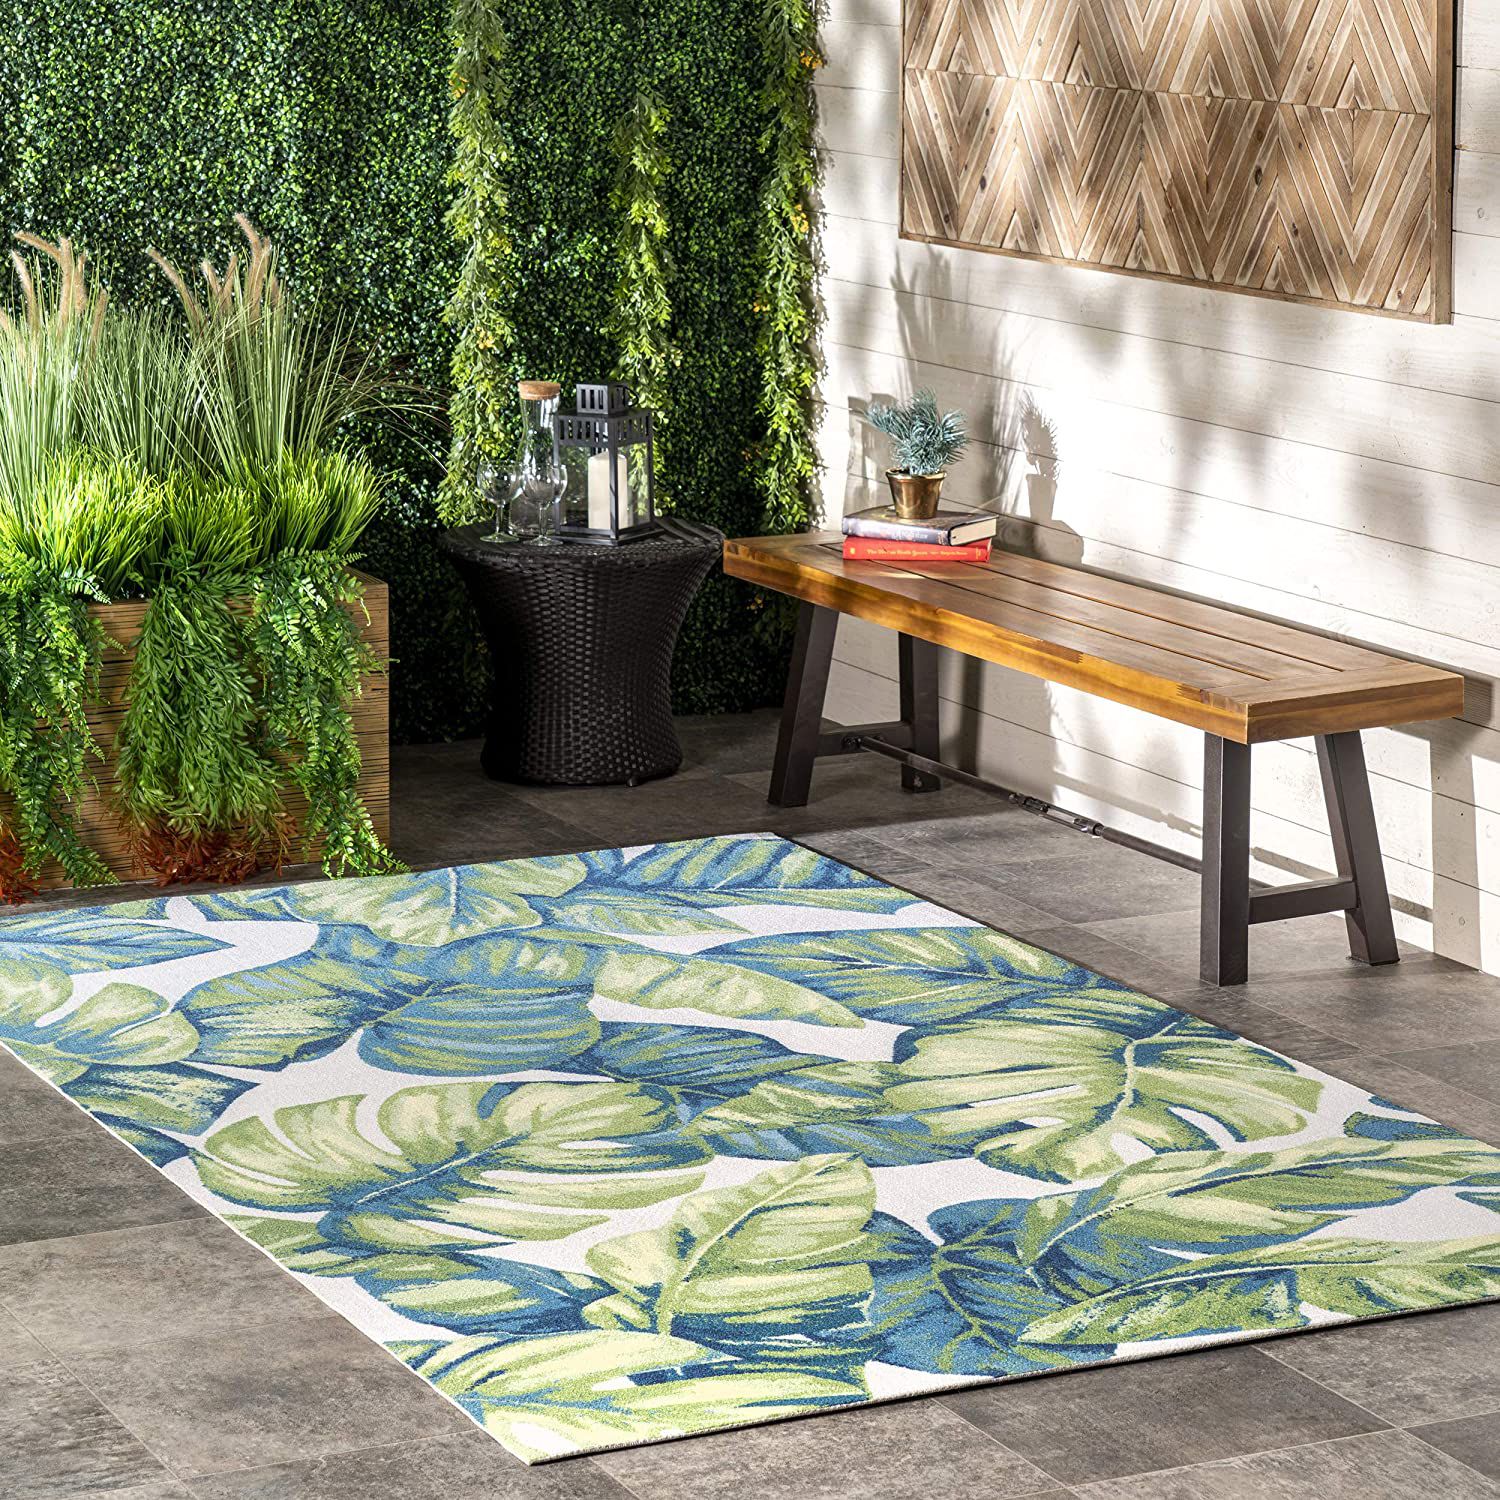 13 Best Outdoor Rugs You Can On, Outside Rugs For Decks